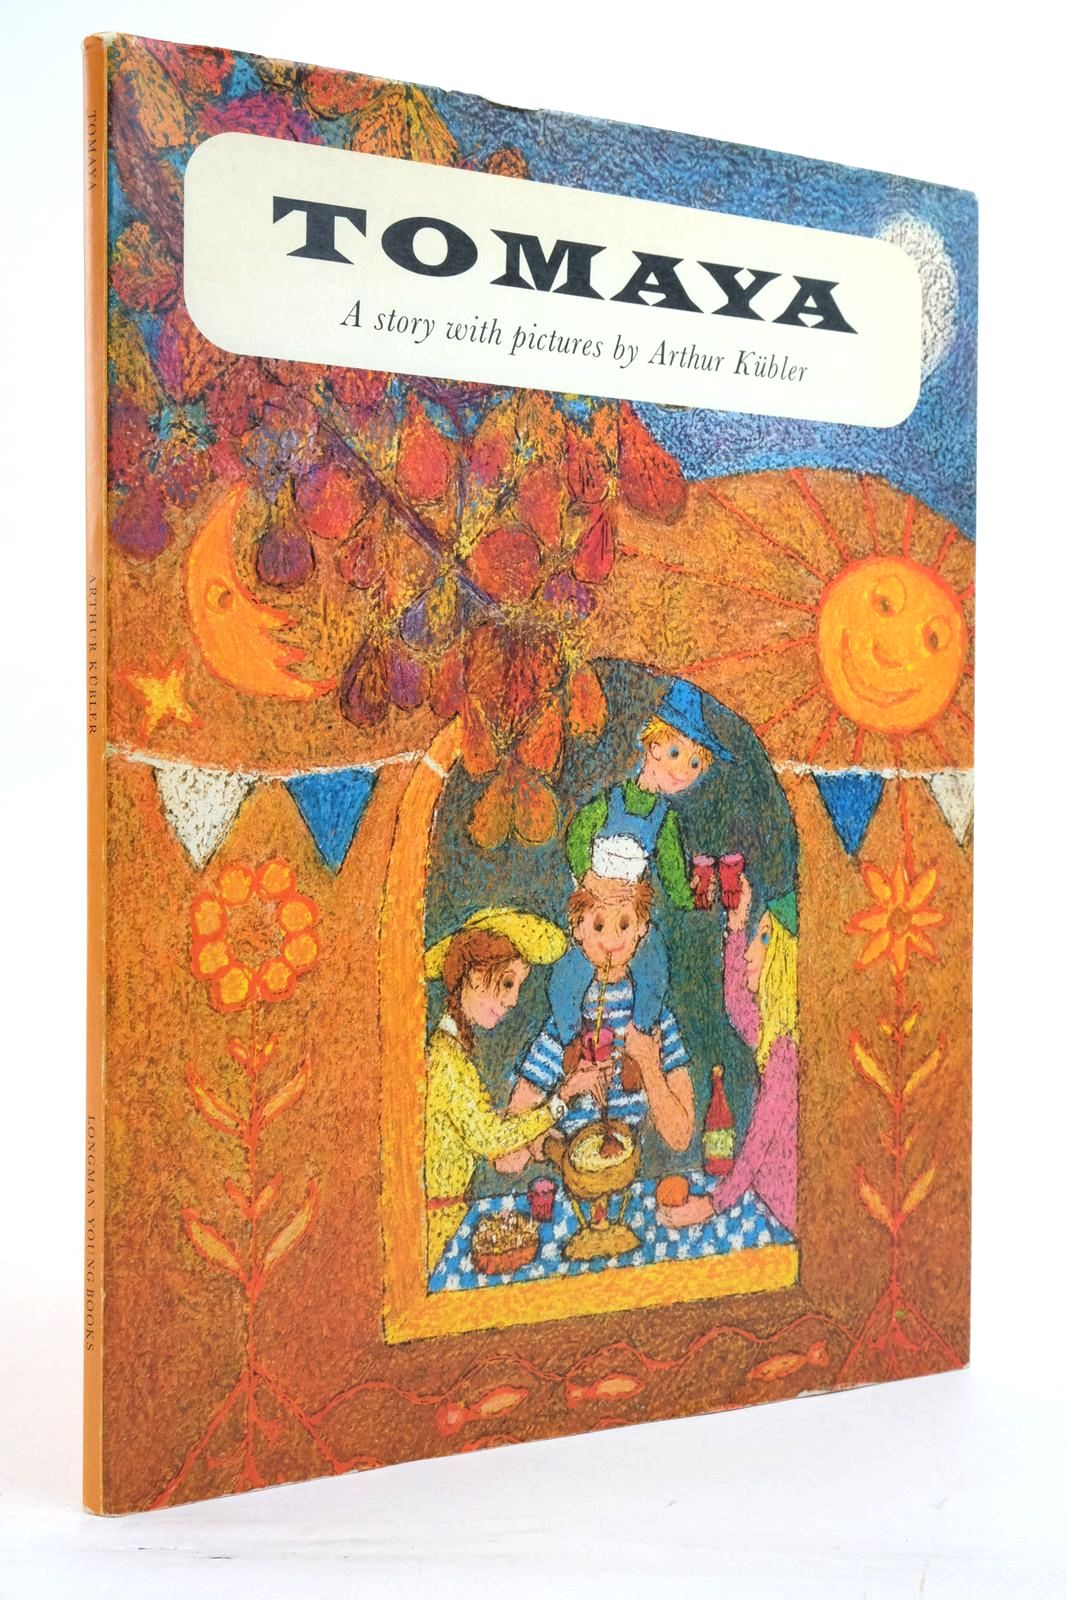 Photo of TOMAYA written by Kubler, Arthur illustrated by Kubler, Arthur published by Longman Young Books (STOCK CODE: 2137484)  for sale by Stella & Rose's Books